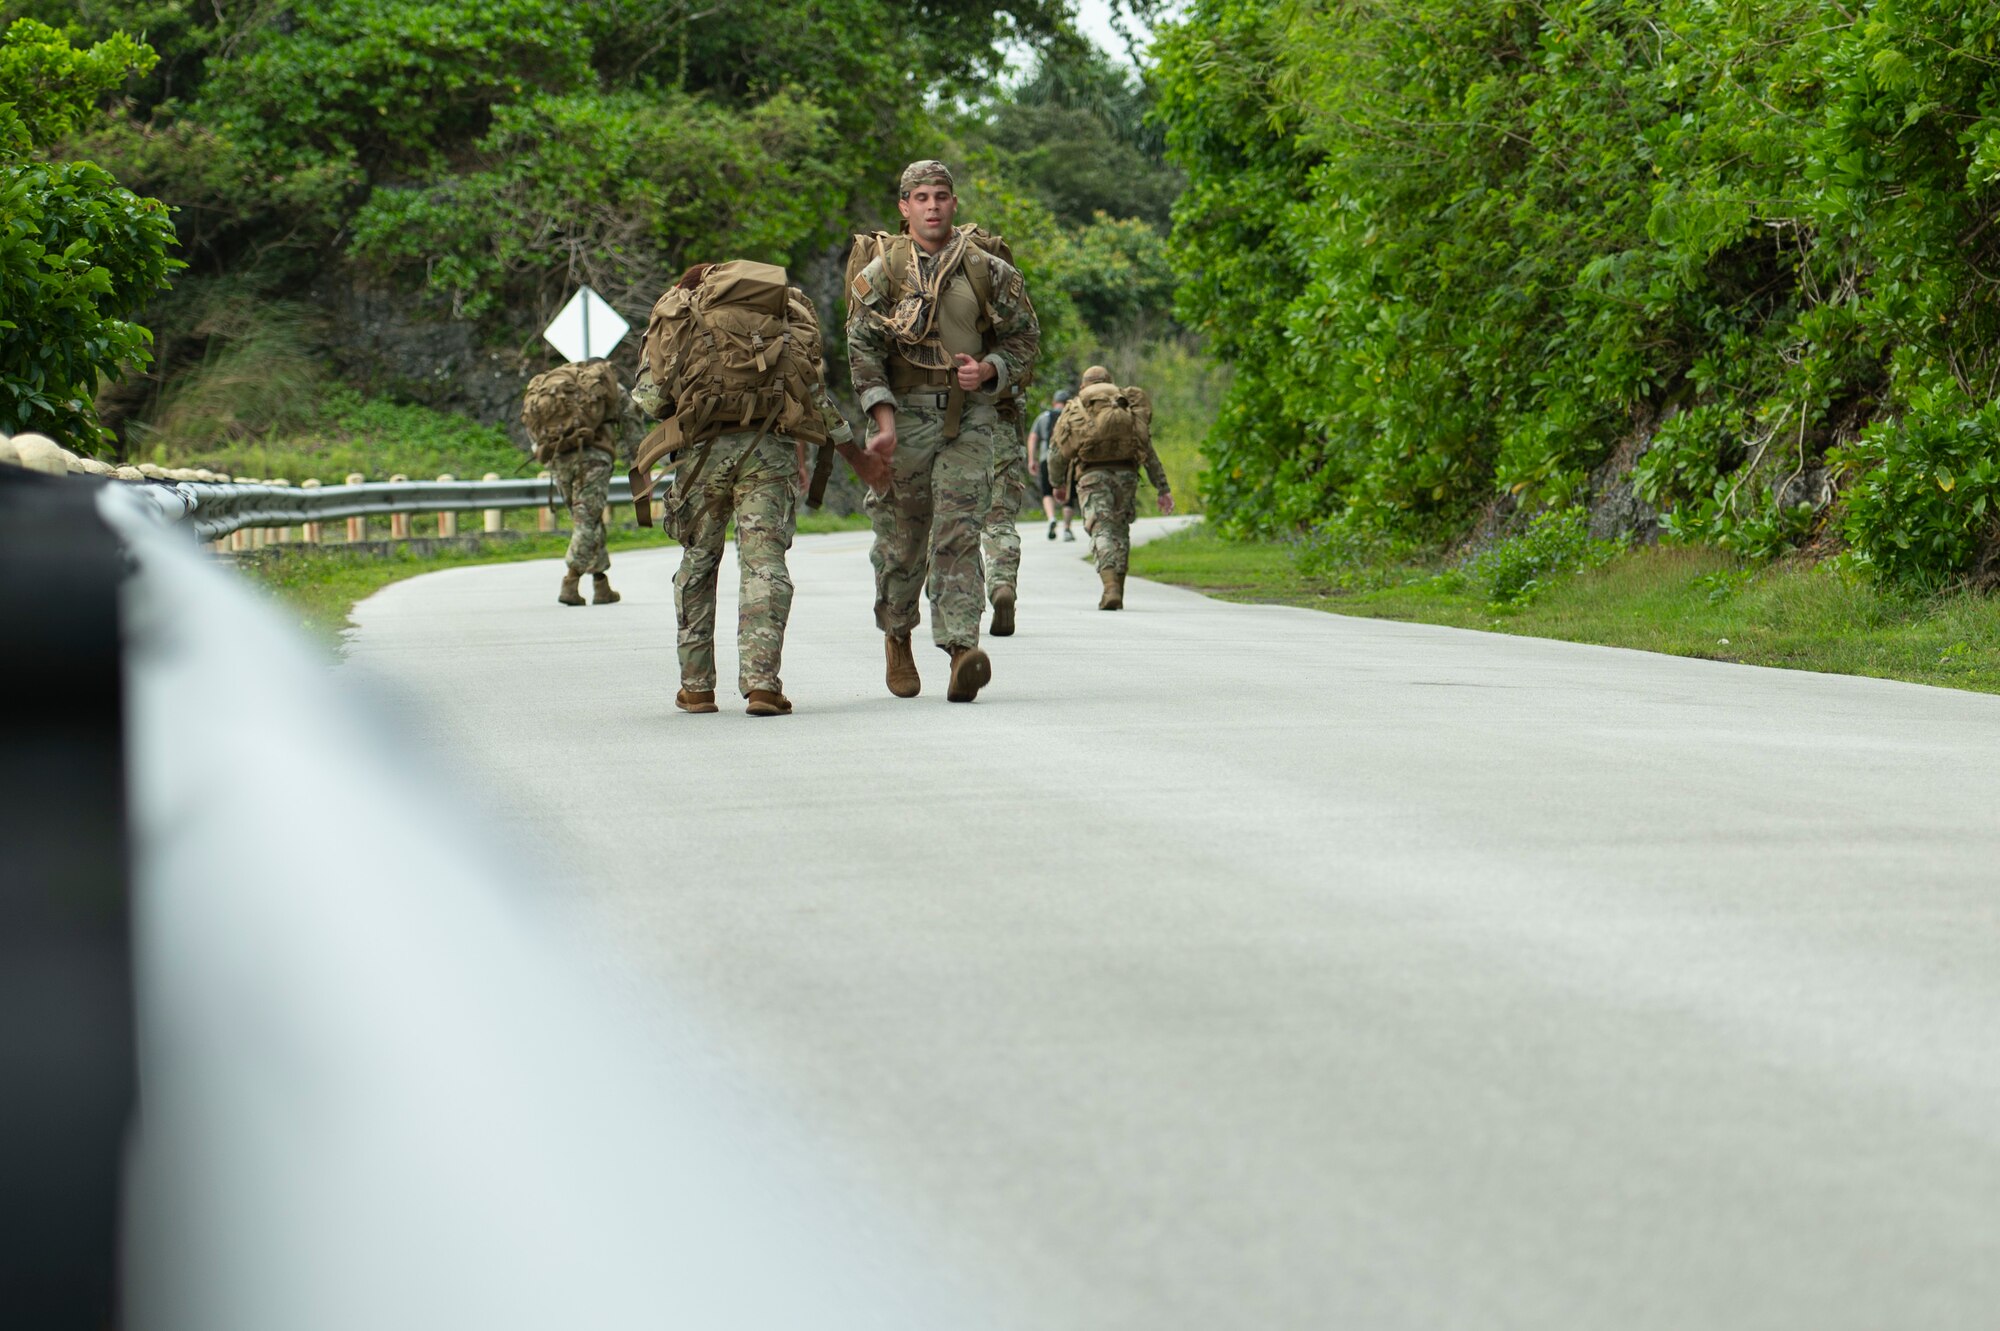 U.S. Air Force service members walk from Tarague beach to Sanders Slope during the Office of Special Investigations’ Hustler-6 memorial event on Andersen Air Force Base, Guam, Dec. 21, 2022. Since 2016, OSI agents assigned to Andersen AFB have annually honored the Hustler-6, who lost their lives during a mission near Bagram, Afghanistan on Dec. 21, 2015, by rucking up and down Sanders Slope. (U.S. Air Force photo by Airman Spencer Perkins)